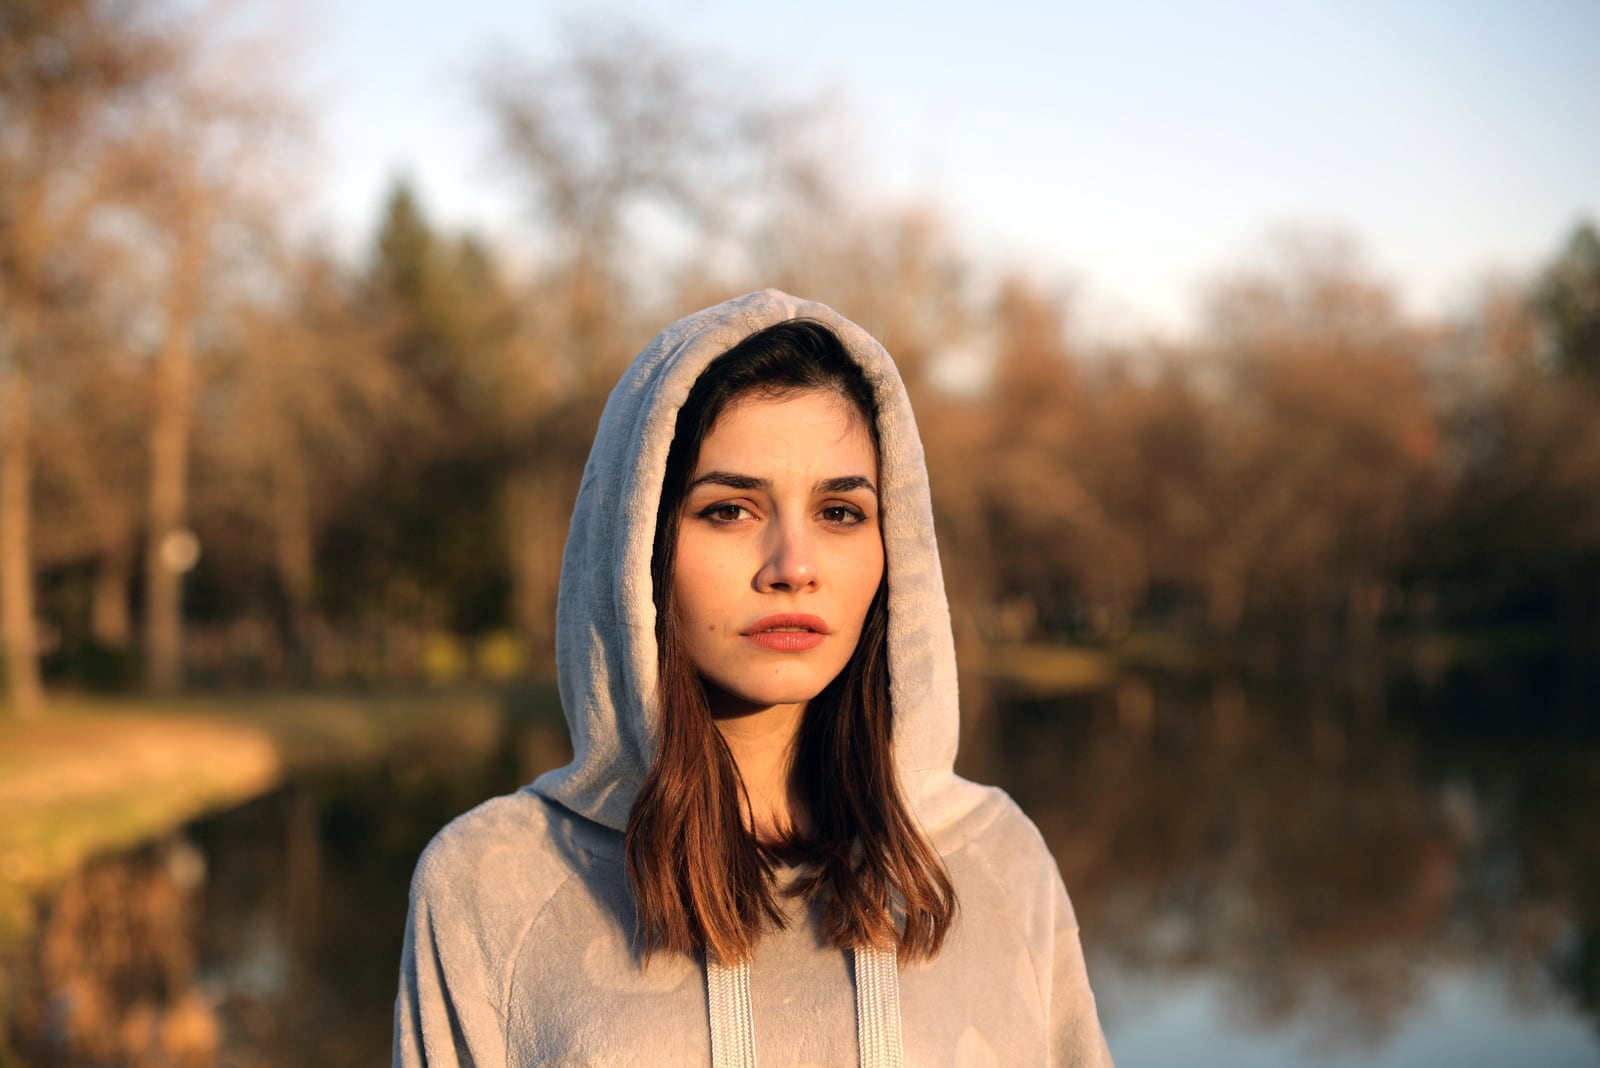 a portrait of a woman in a gray hoodie by the lake